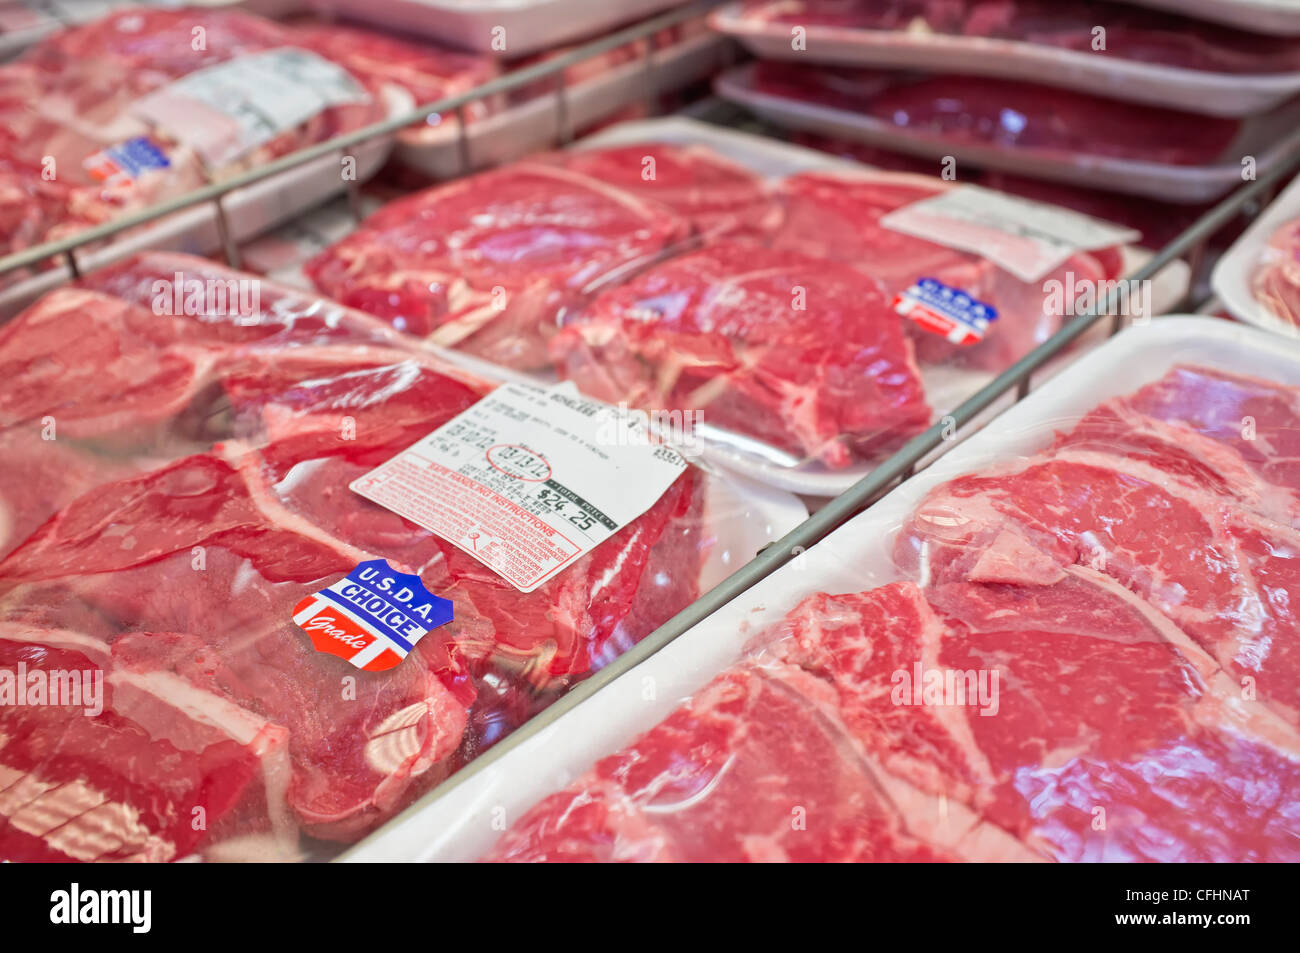 Beef Meat at American Supermarket Stock Photo